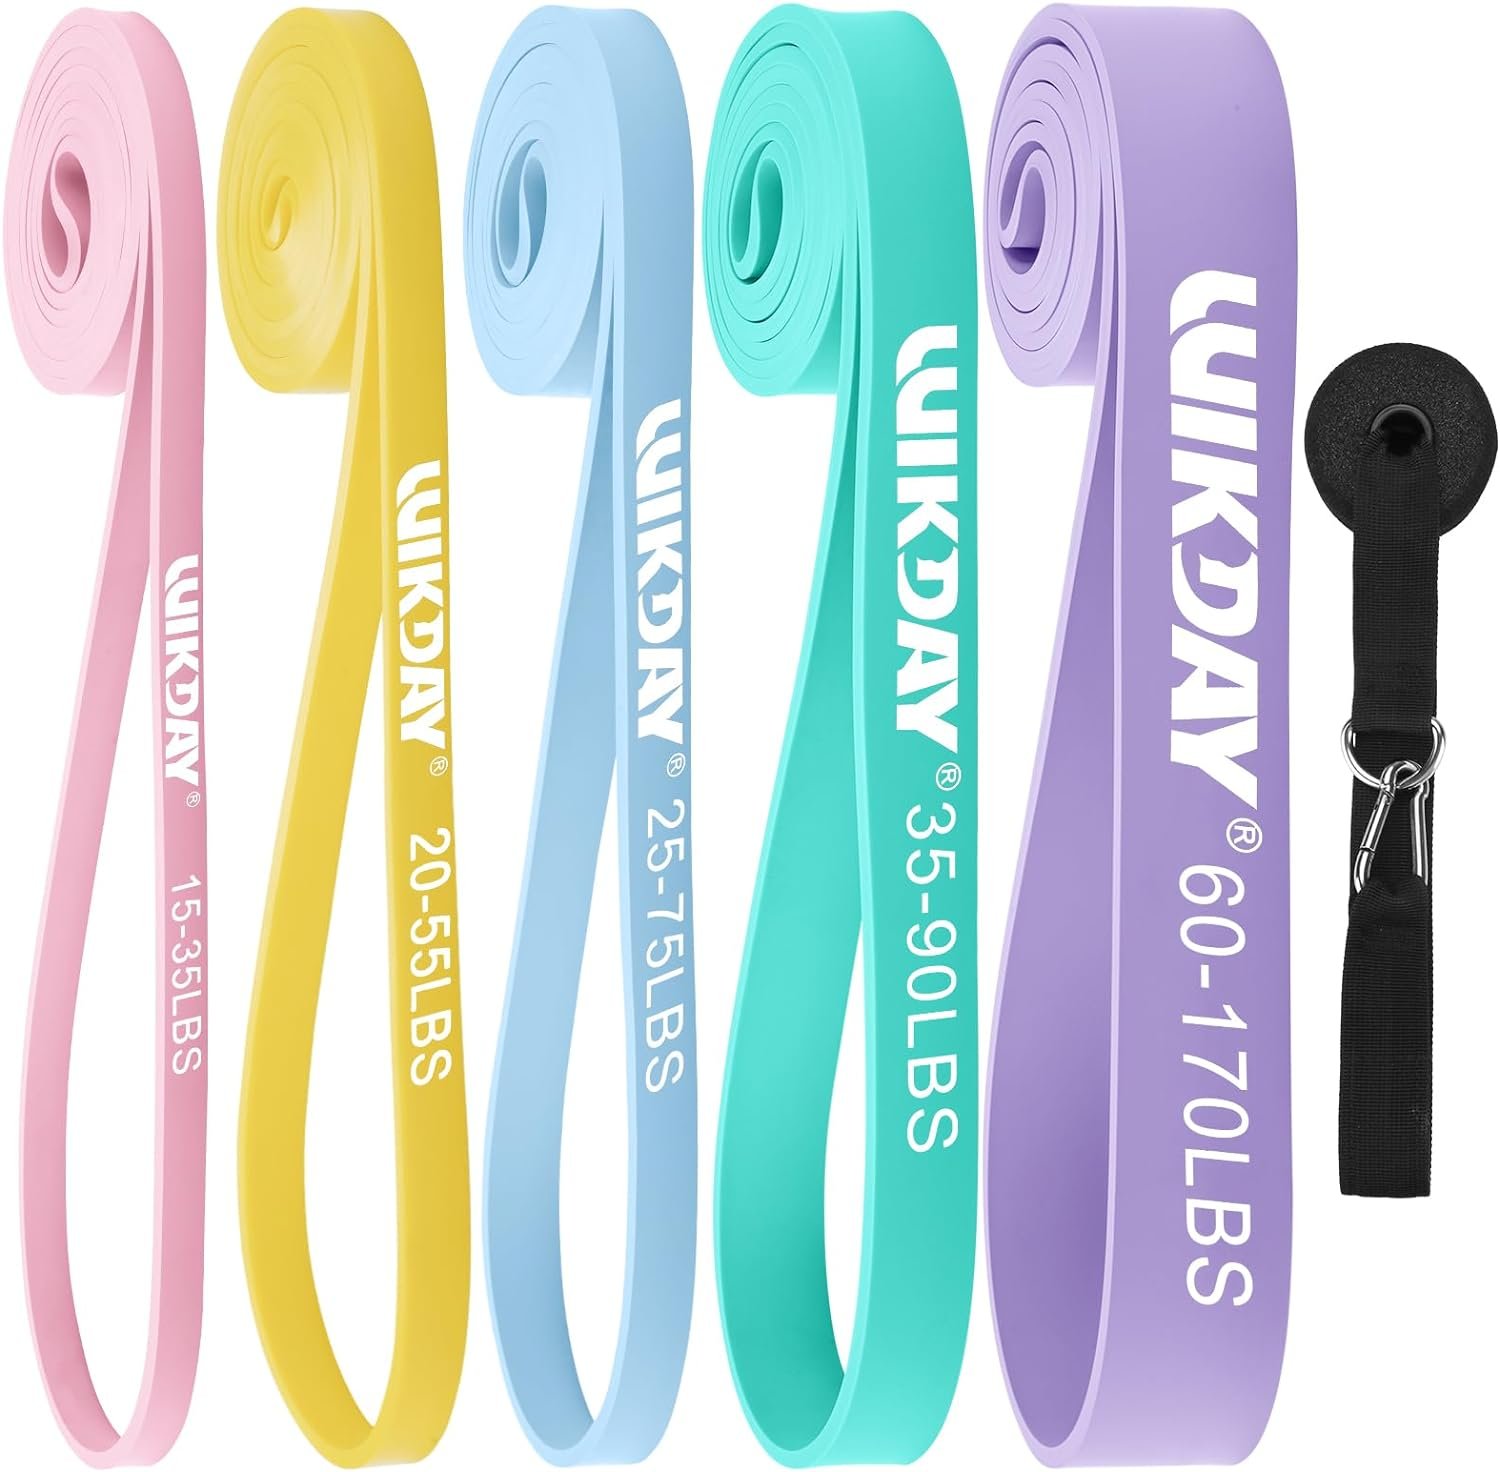 WIKDAY Resistance Bands Review